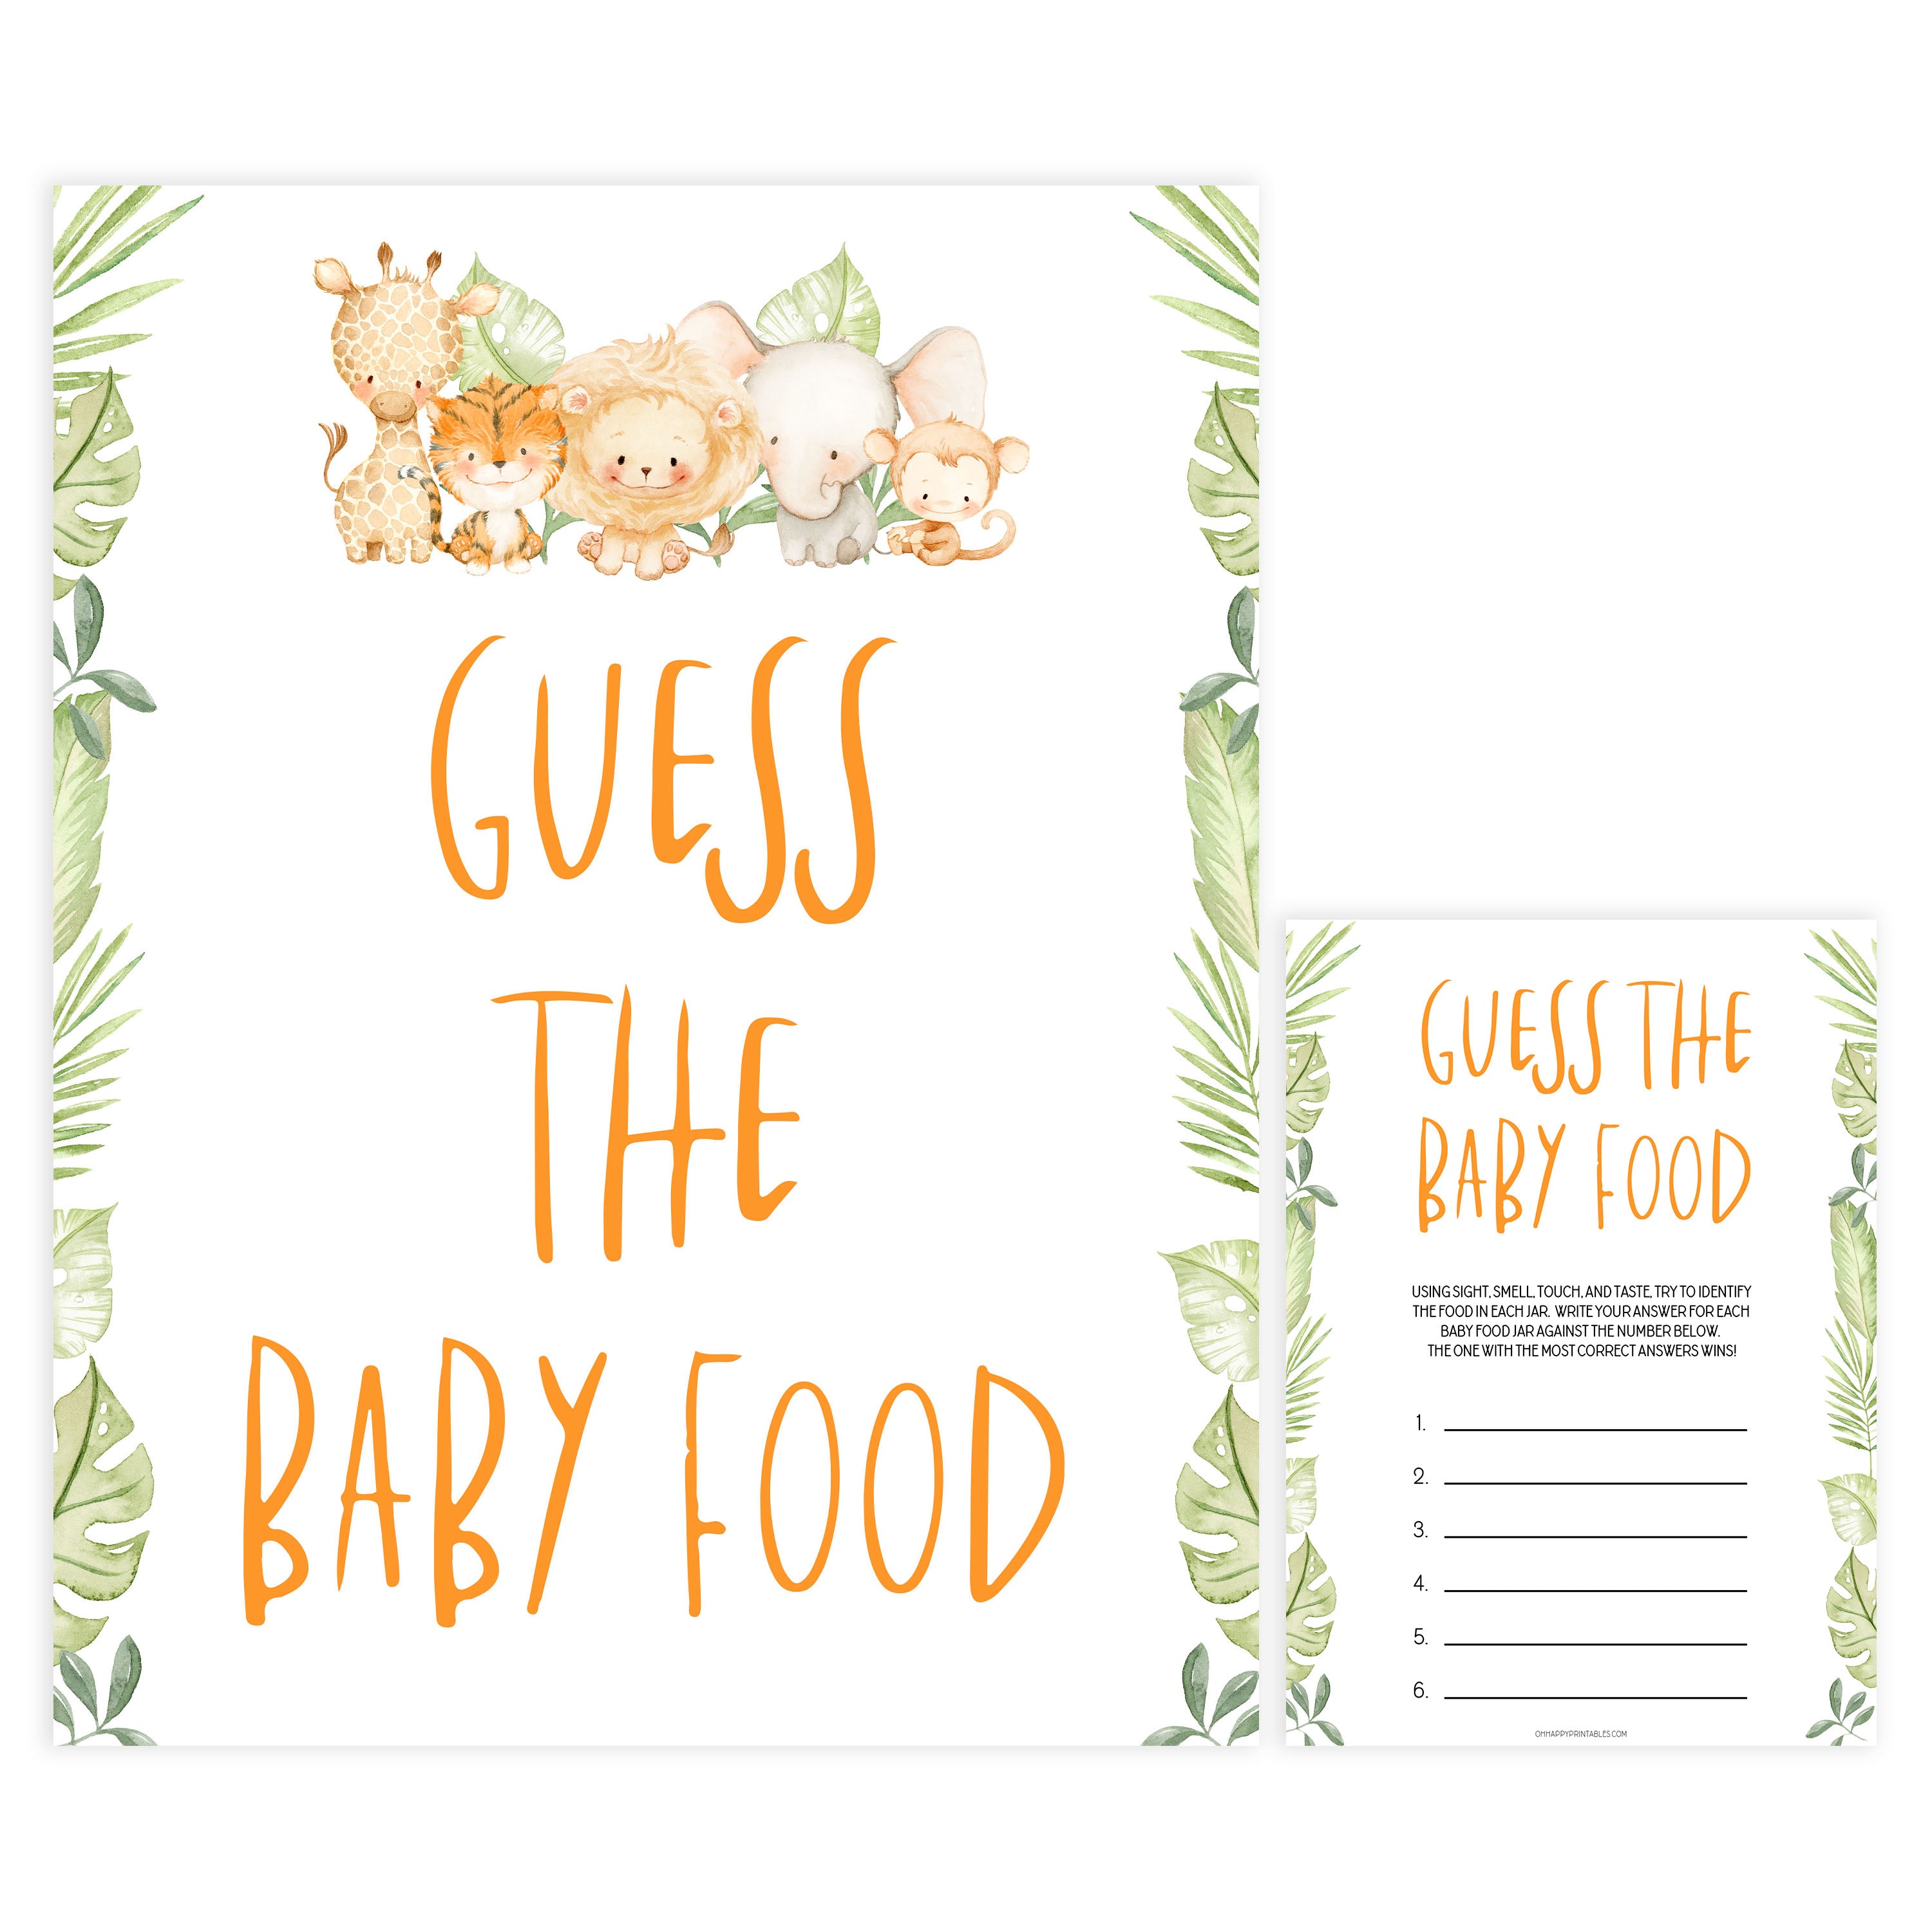 guess the baby food game, Printable baby shower games, safari animals baby games, baby shower games, fun baby shower ideas, top baby shower ideas, safari animals baby shower, baby shower games, fun baby shower ideas